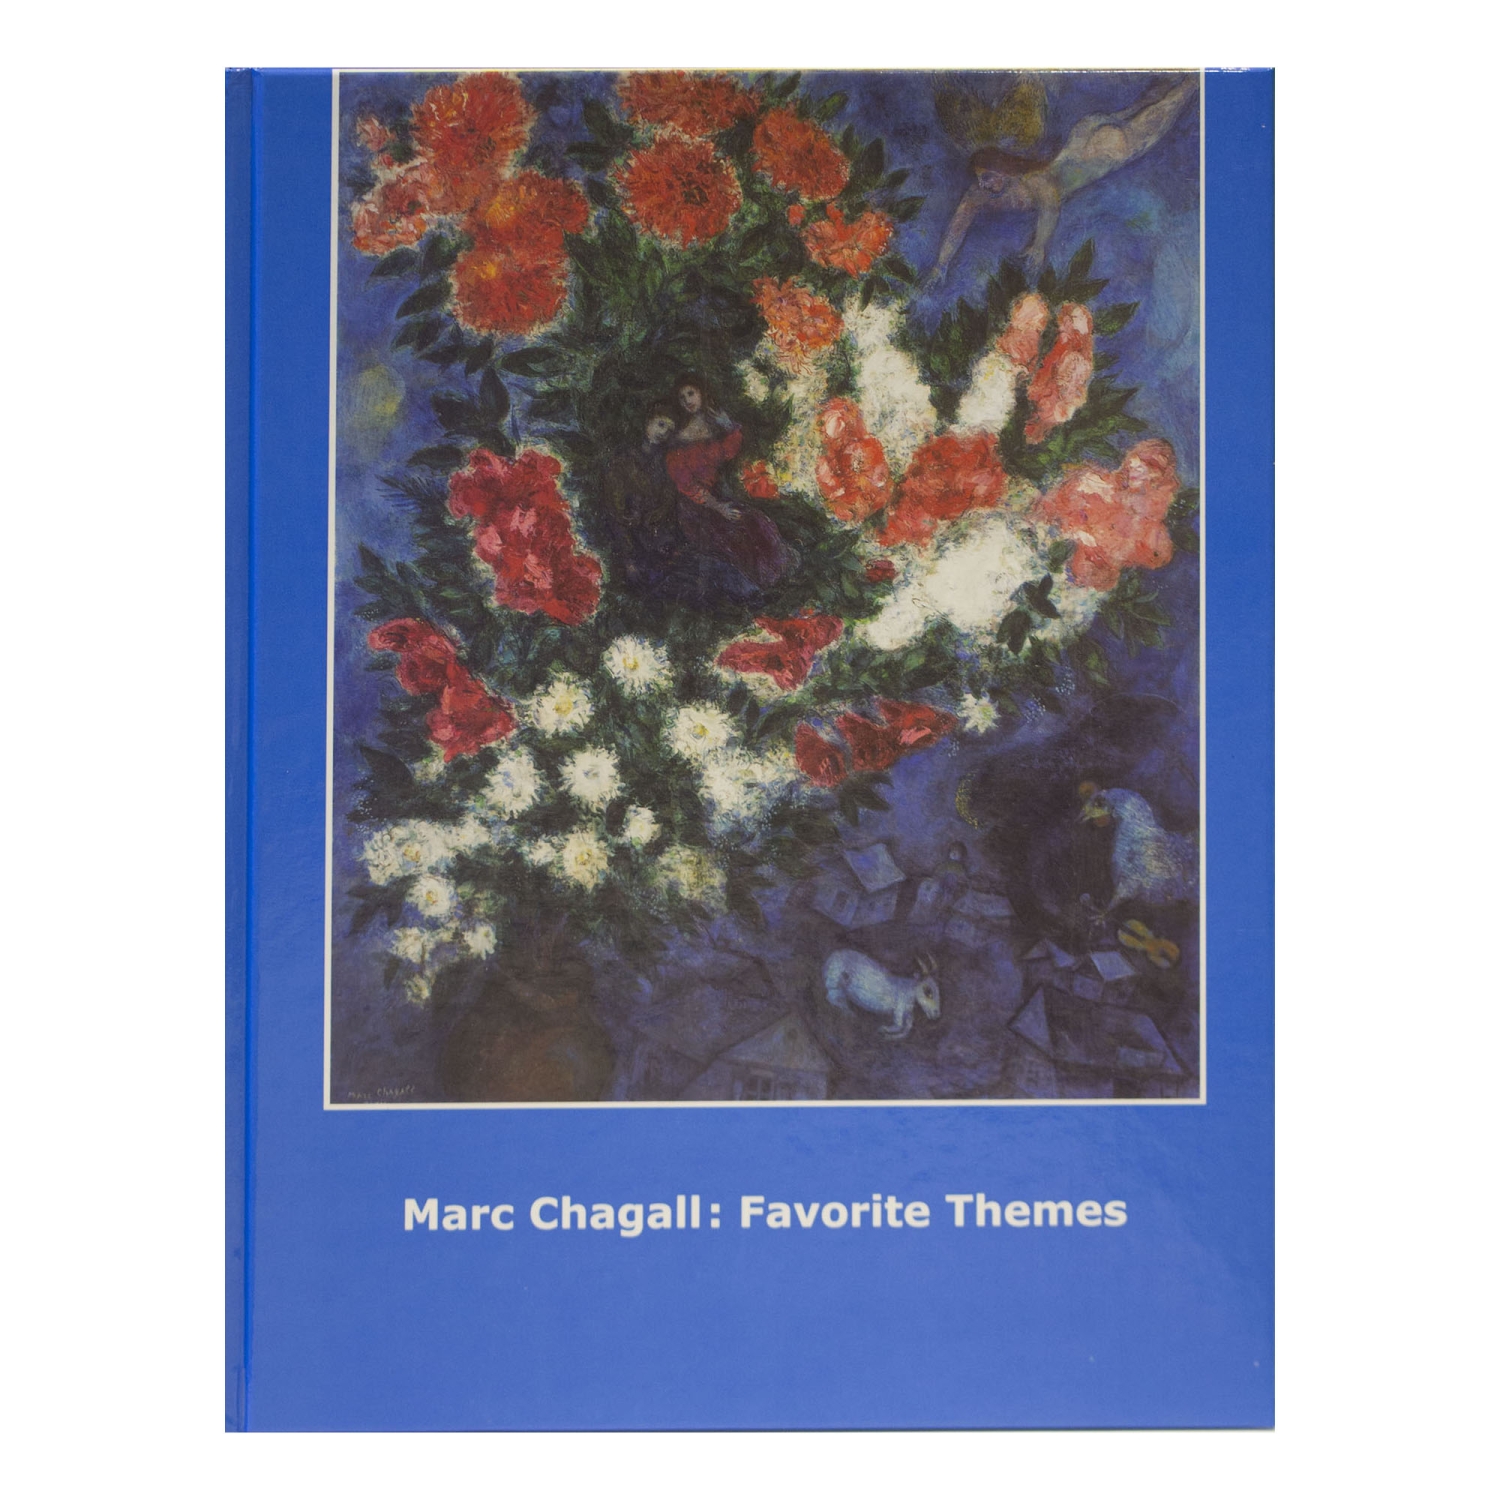  Marc Chagall: Favorite Themes (Hardcover) - 1